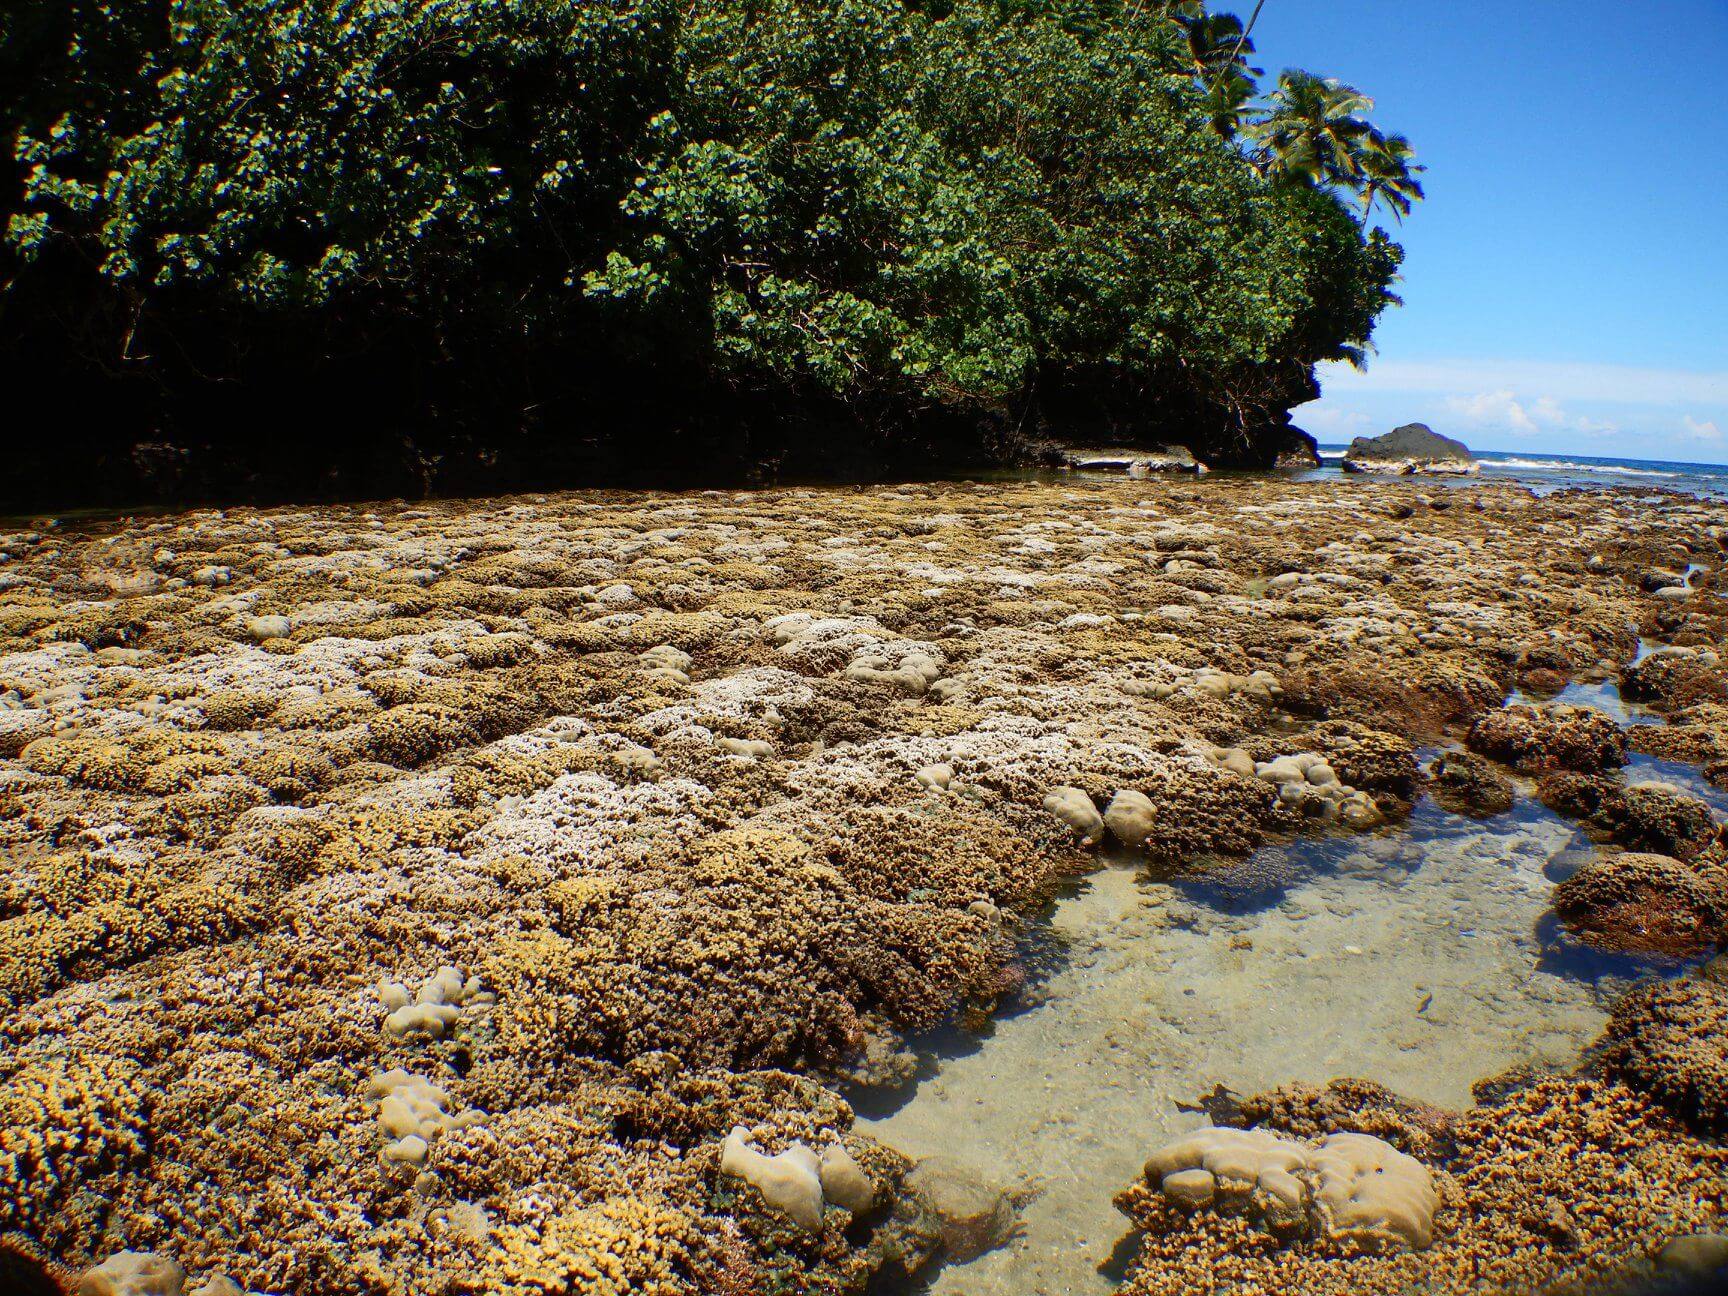 extreme low tides this week at Fogama`a Cove